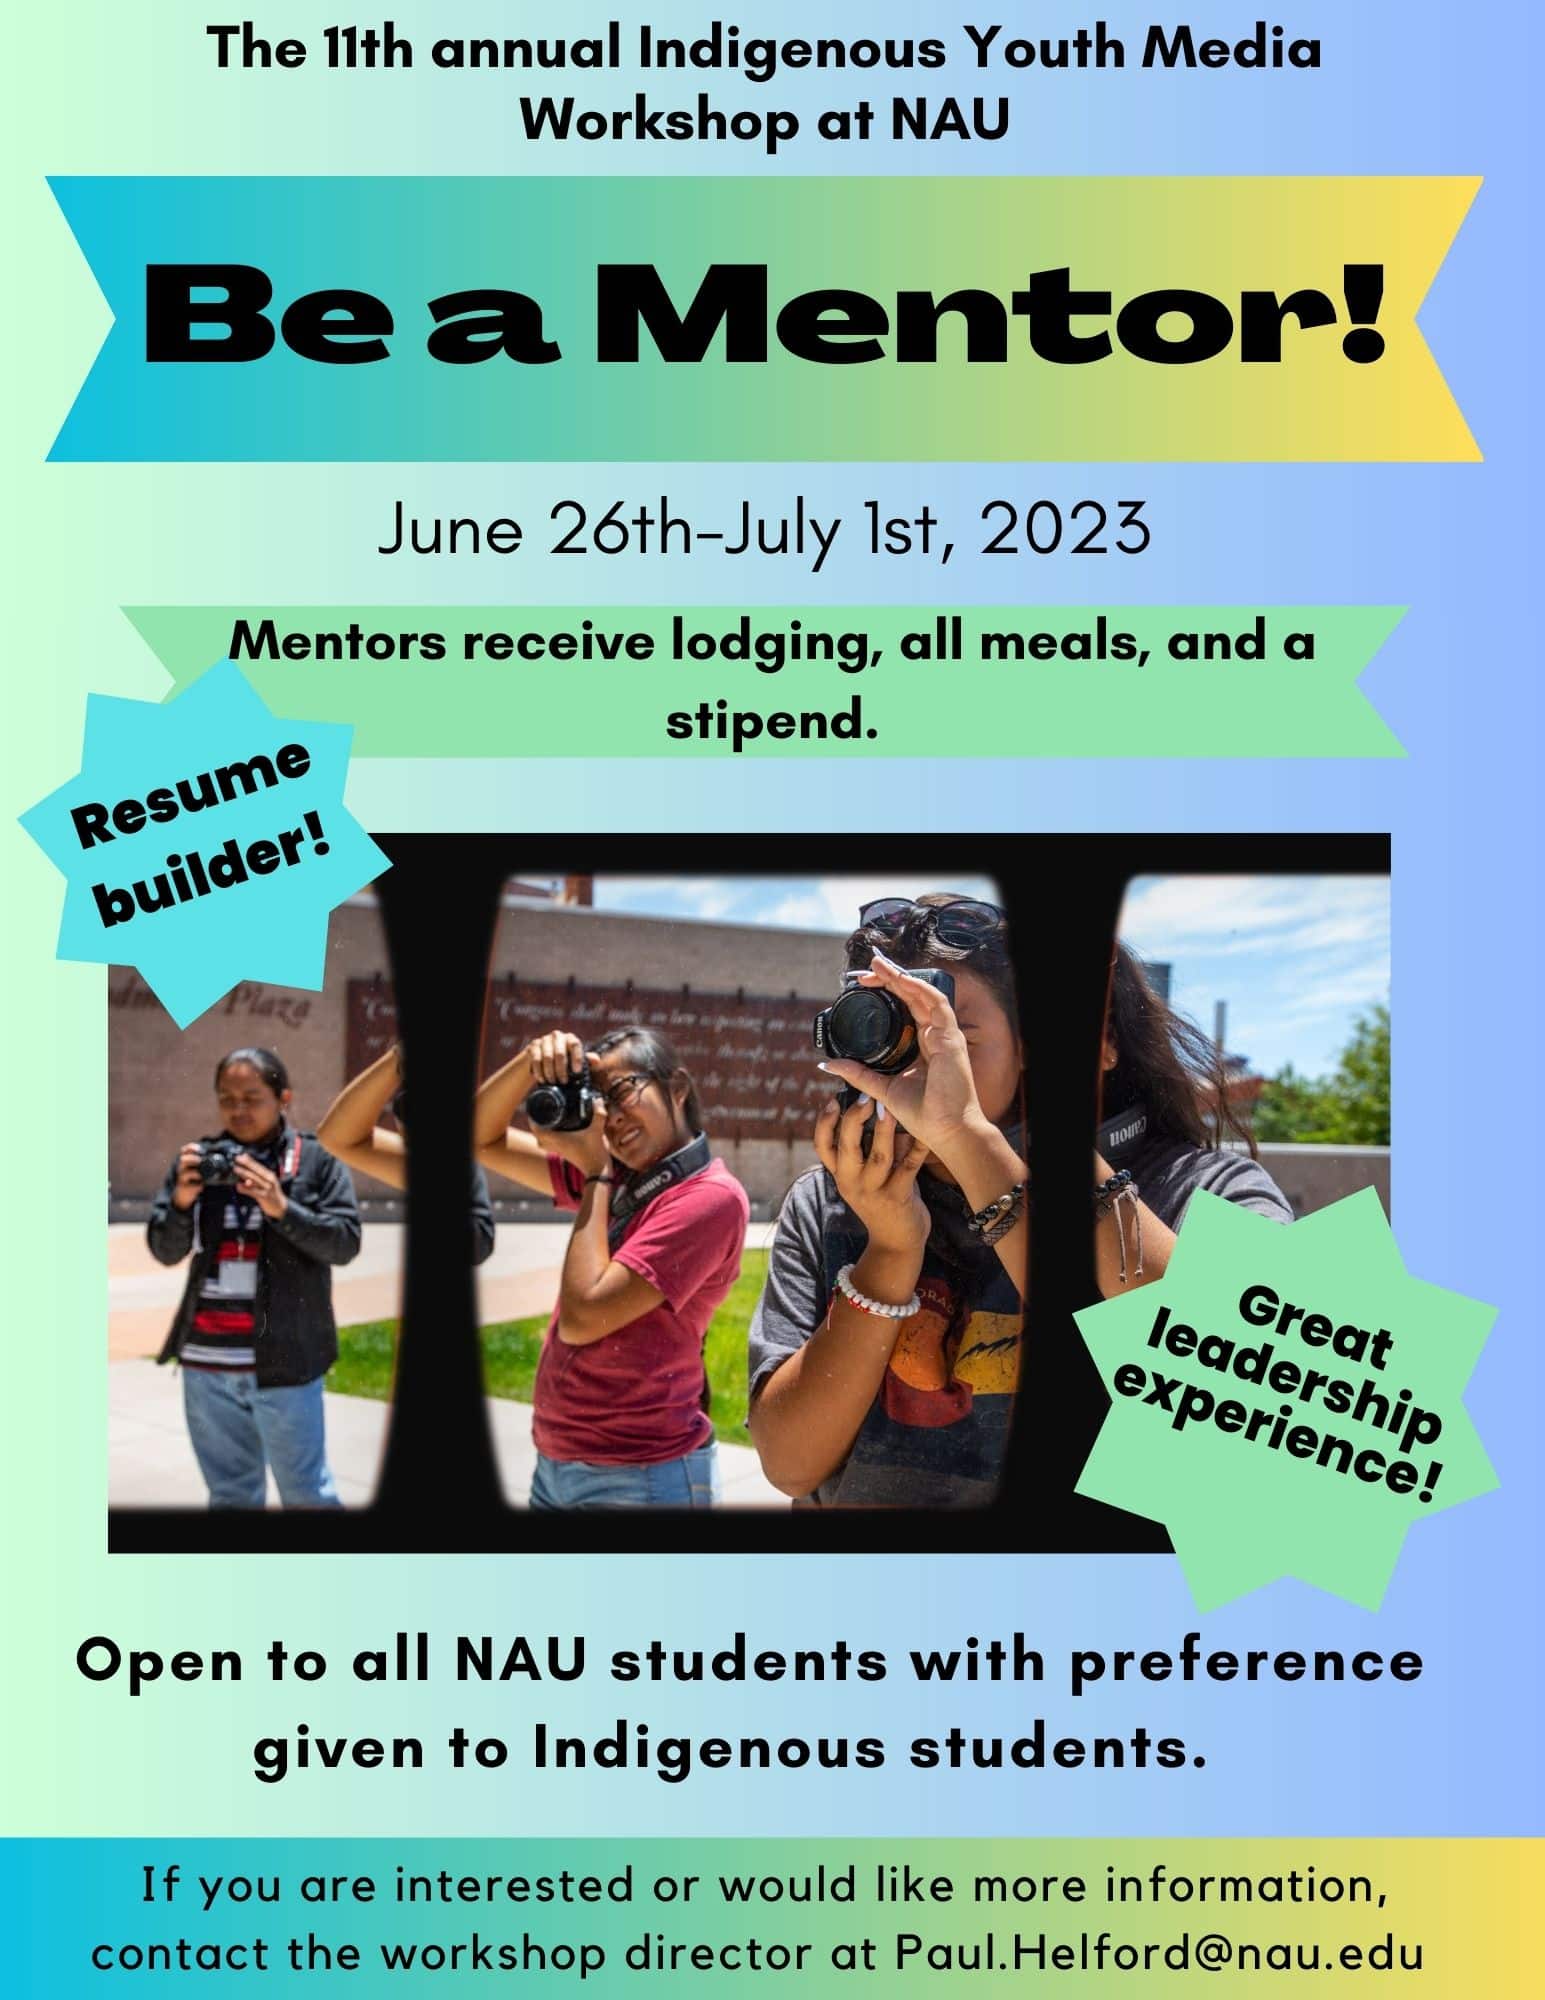 Flyer for the The 11th annual Indigenous Youth Media Workshop at NAU Be a Mentor! June 26th-July 1st, 2023 Mentors receive lodging, all meals, and a stipend. Deadline to apply: May 1 Resume builder! Great leadership experience! Open to all NAU students with preference given to Indigenous students. If you are interested or would like more information, contact the workshop director at Paul. Helford@nau.edu